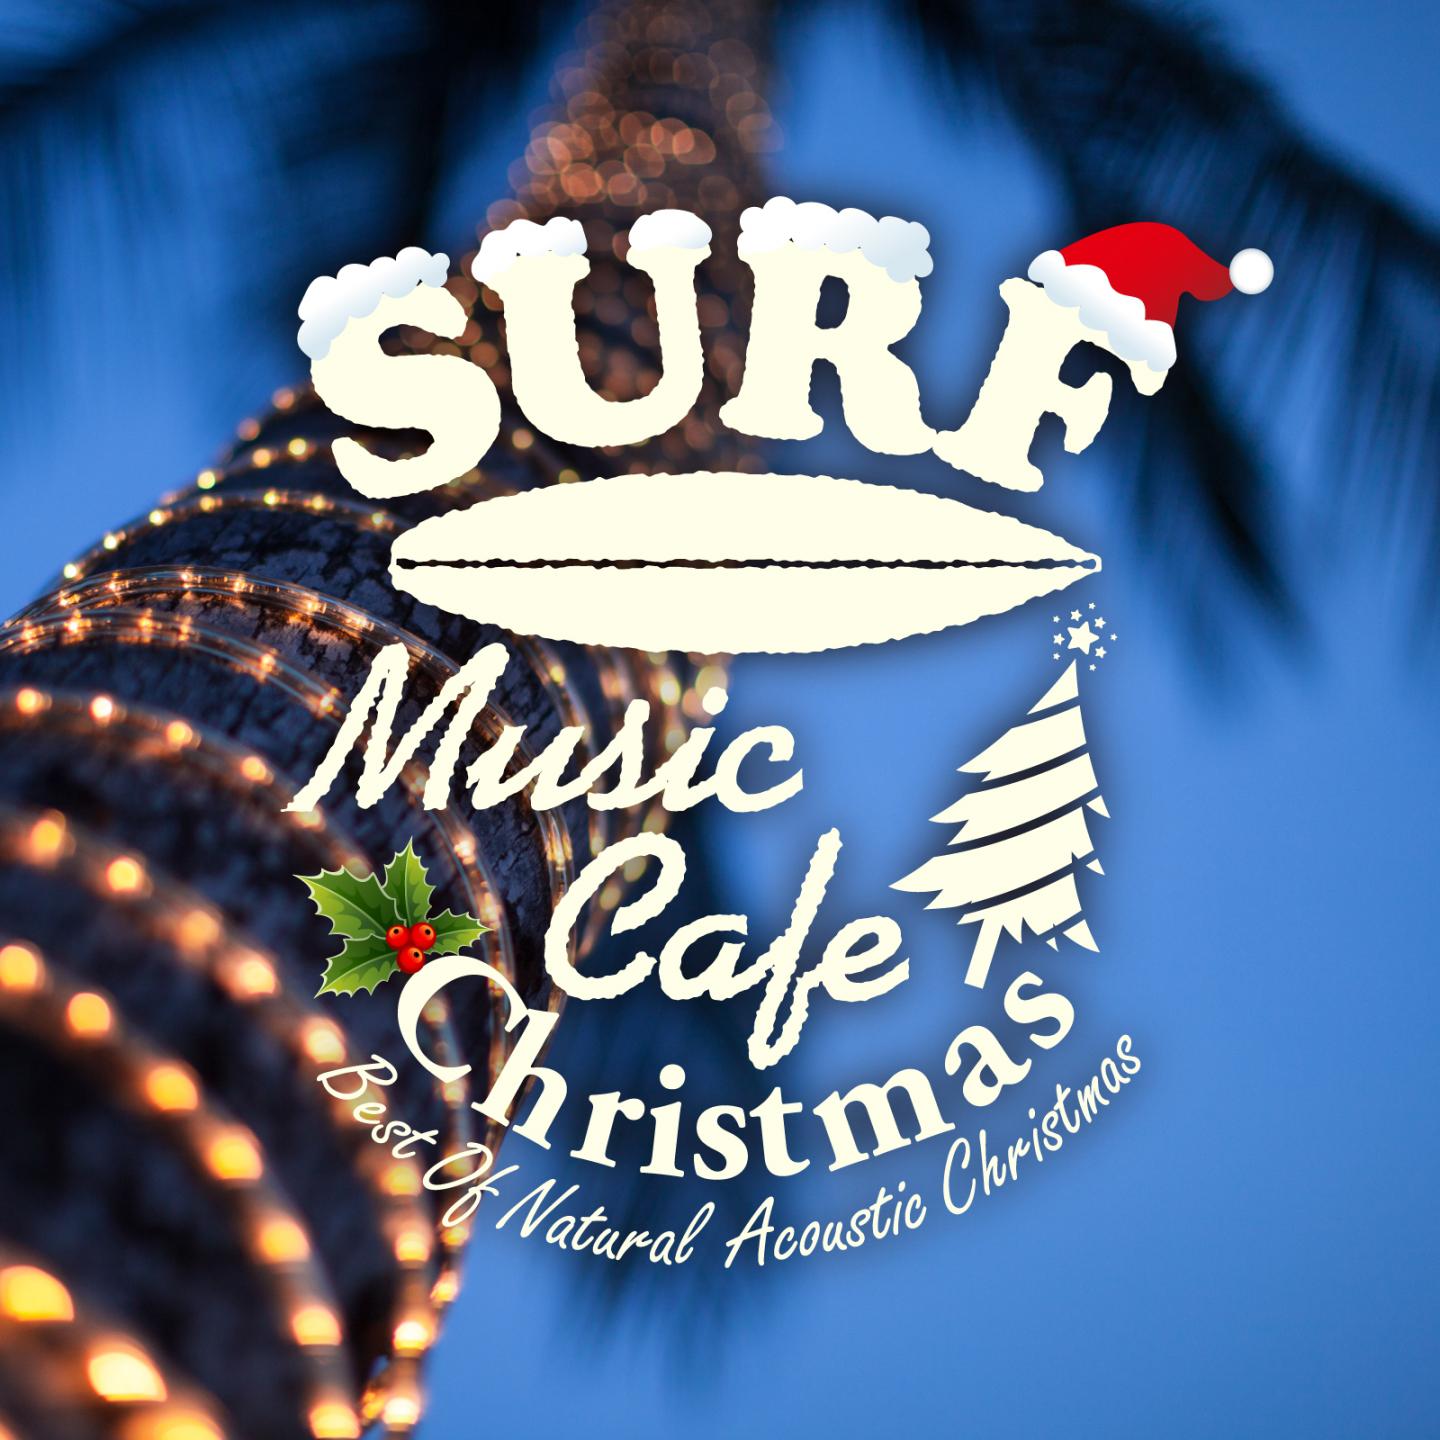 Постер альбома Surf Music Cafe Christmas - Best of Natural Acoustic Christmas